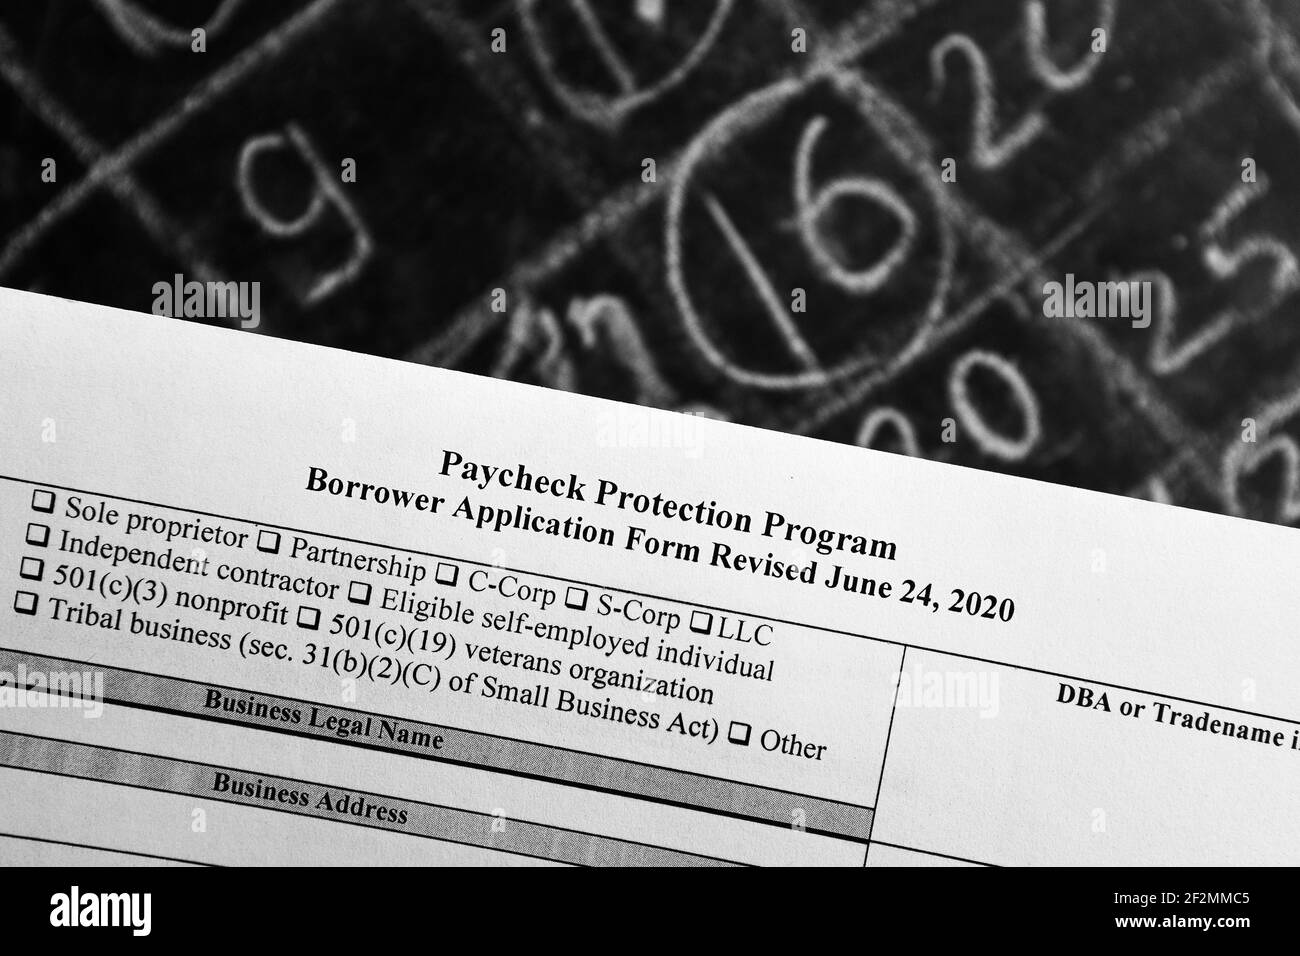 selective focus monochrome photo of paycheck protection program borrower application form revised, on a background of chalk board with numbers Stock Photo